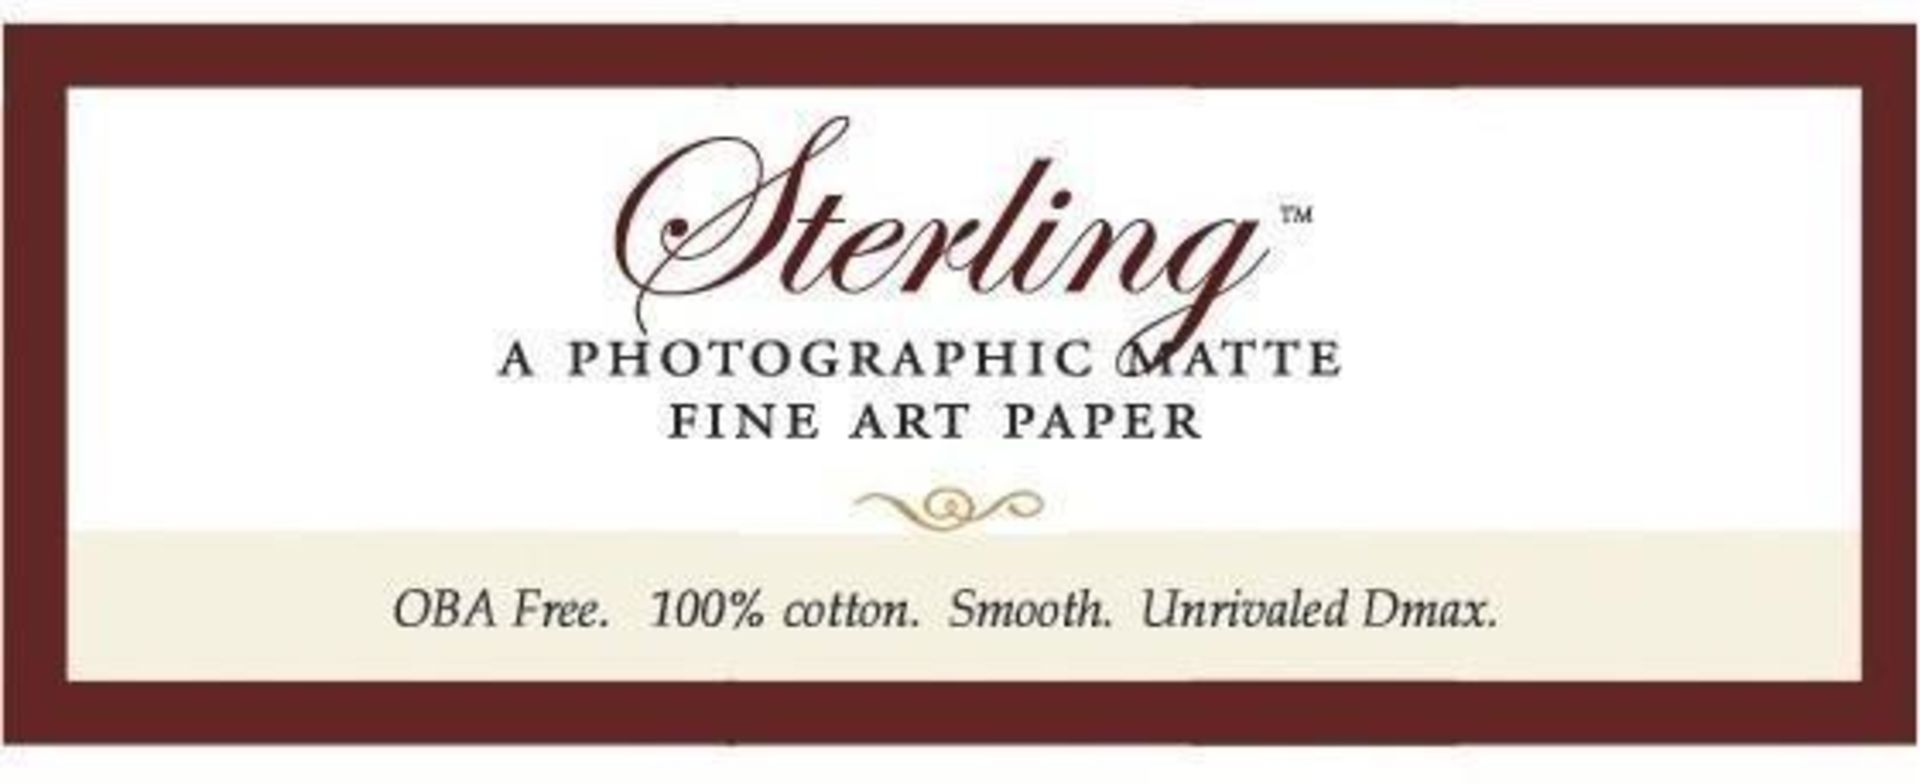 1 x Roll of Breathing Colour STERLING Photographic Matte Fine Art Paper - Size 24" x 40' - 205gsm - - Image 5 of 6